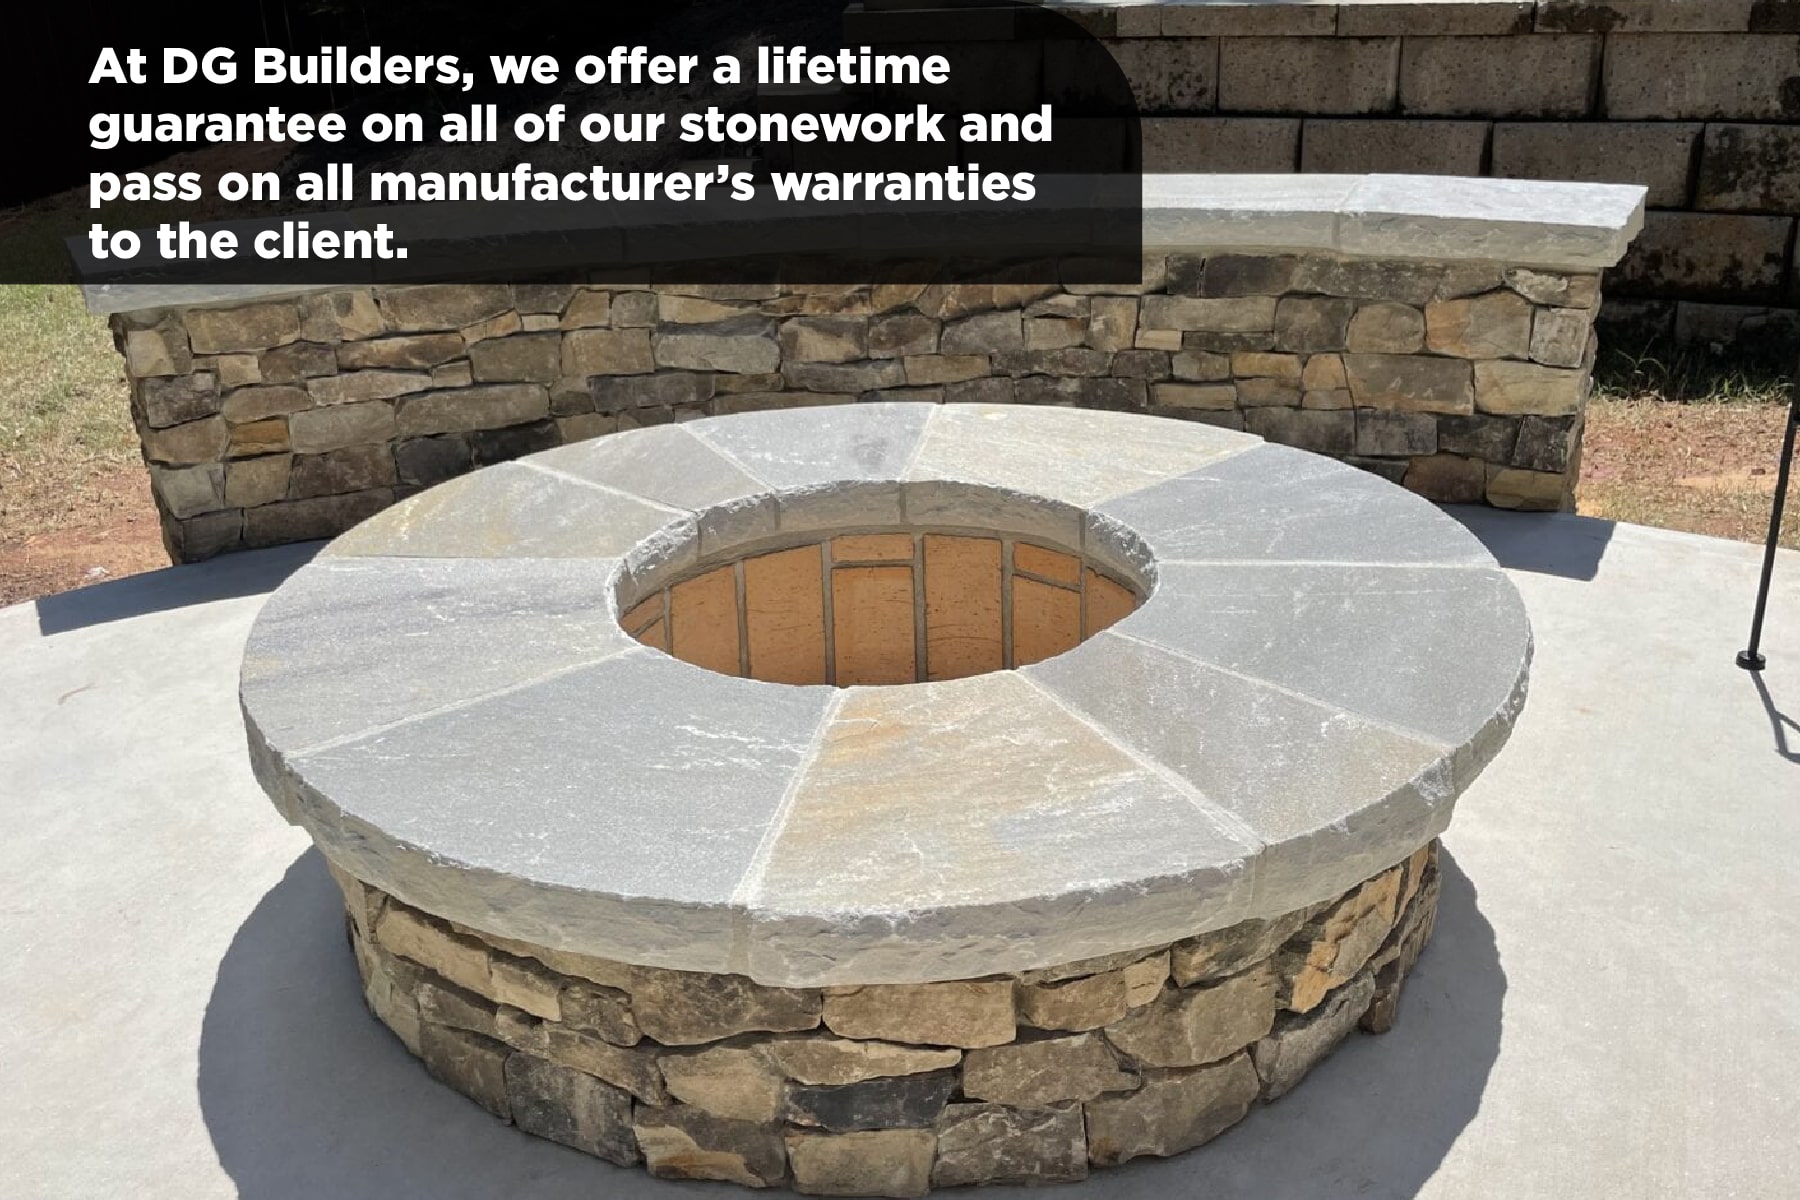 stone fireplace in a backyard patio, with text on an overlay